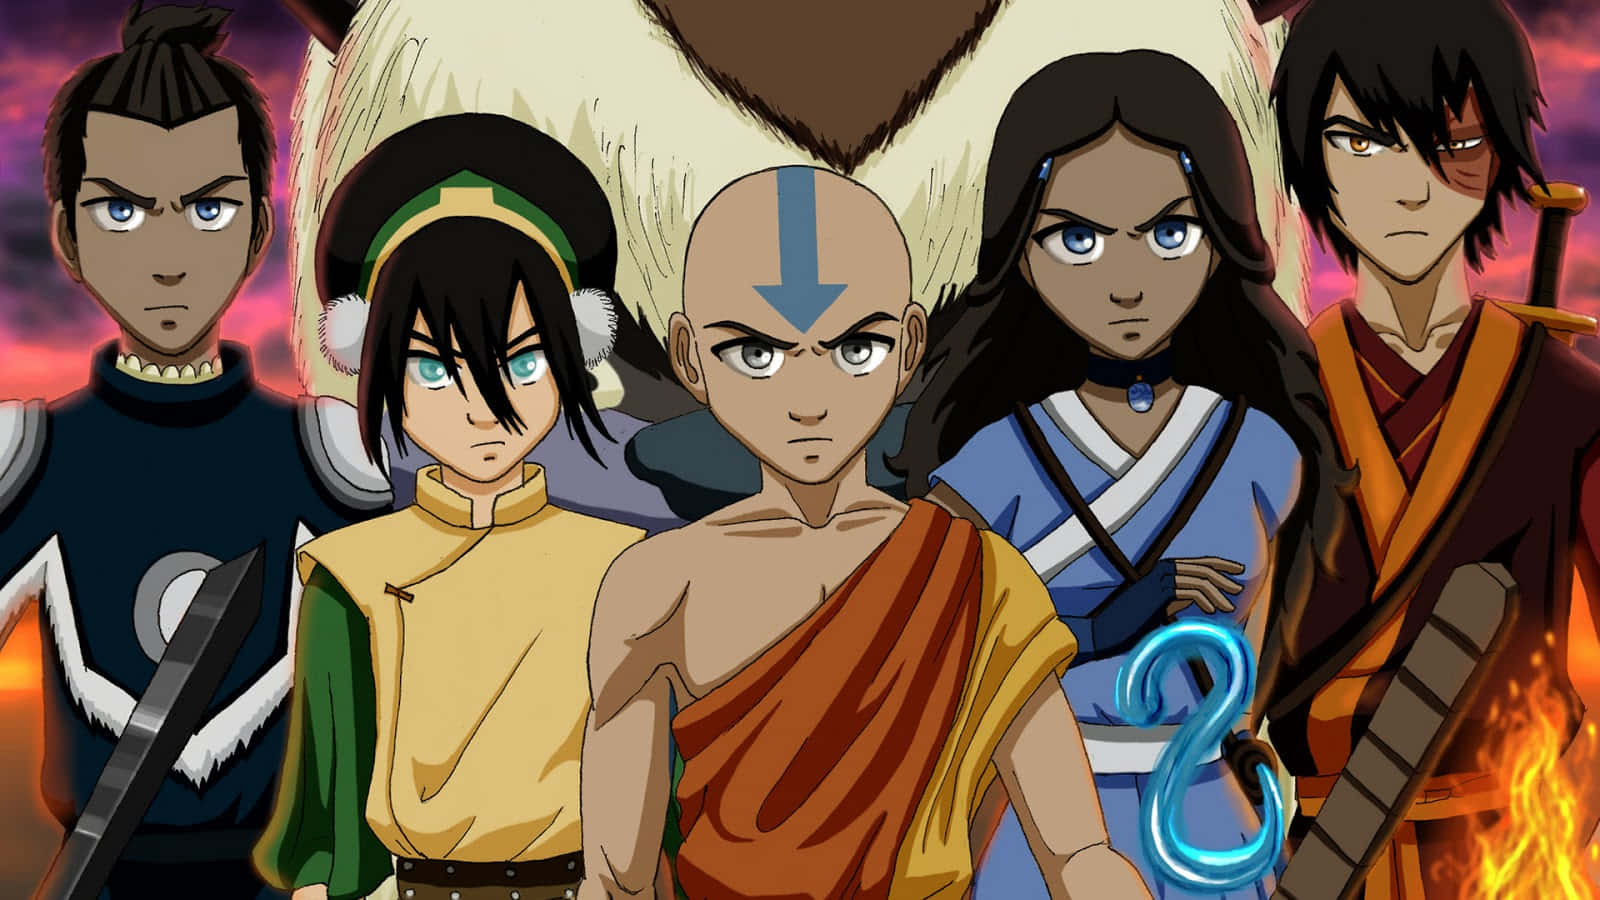 "A Red Sunrise in the World of Avatar: The Last Airbender"